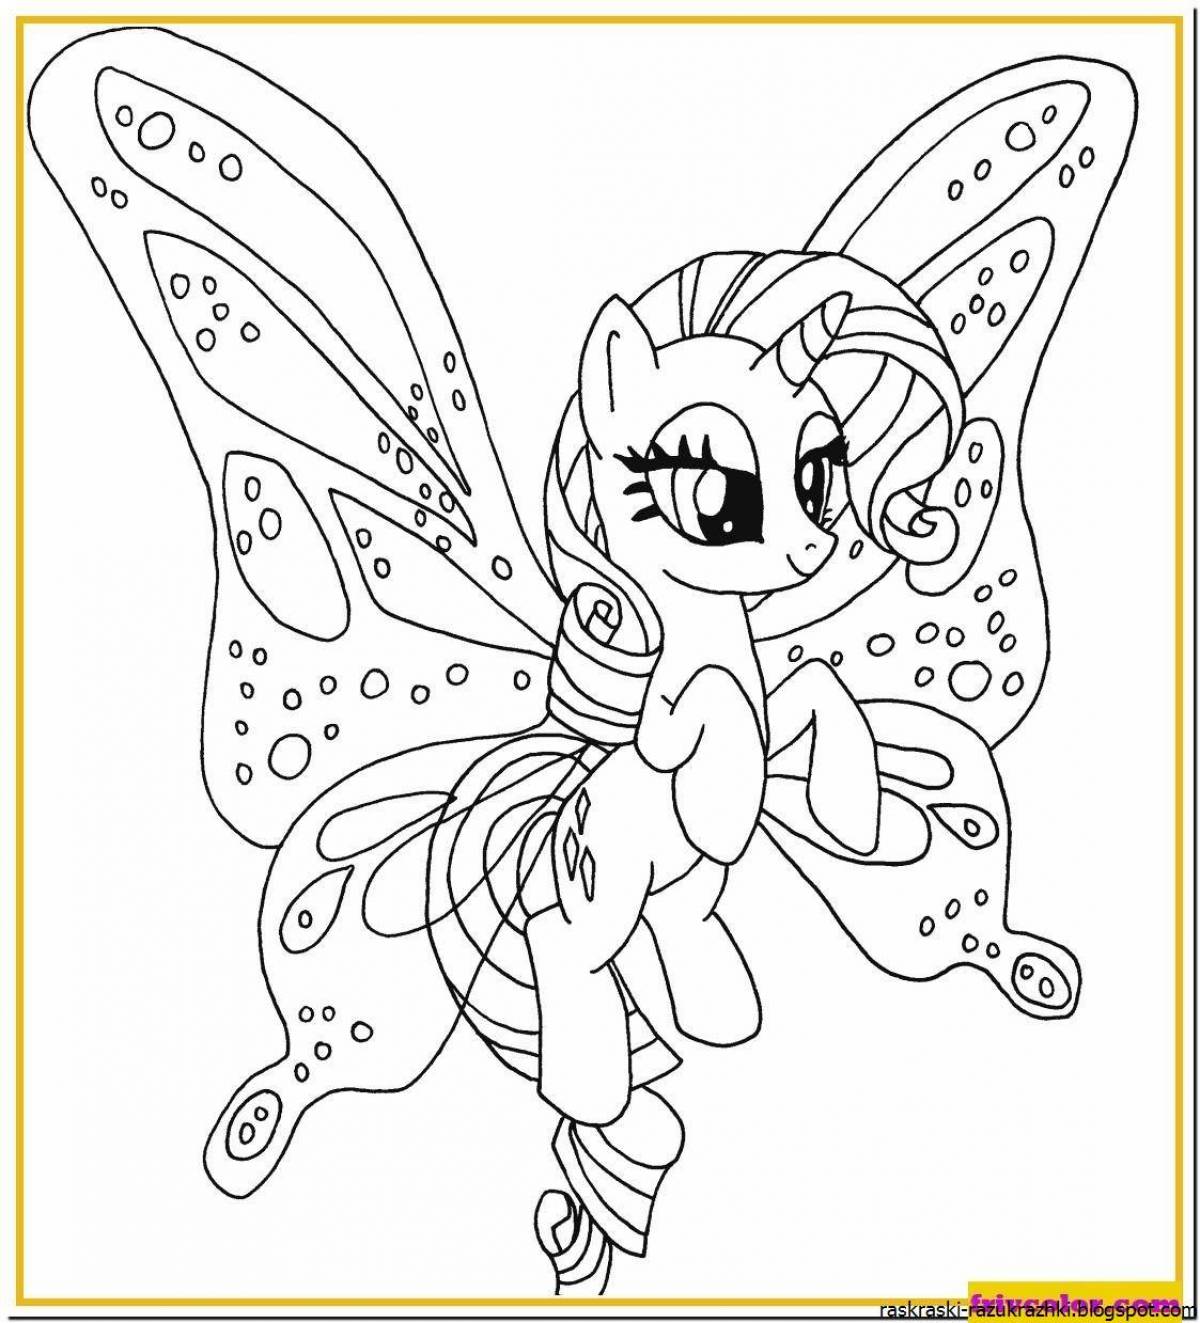 Live pony coloring page